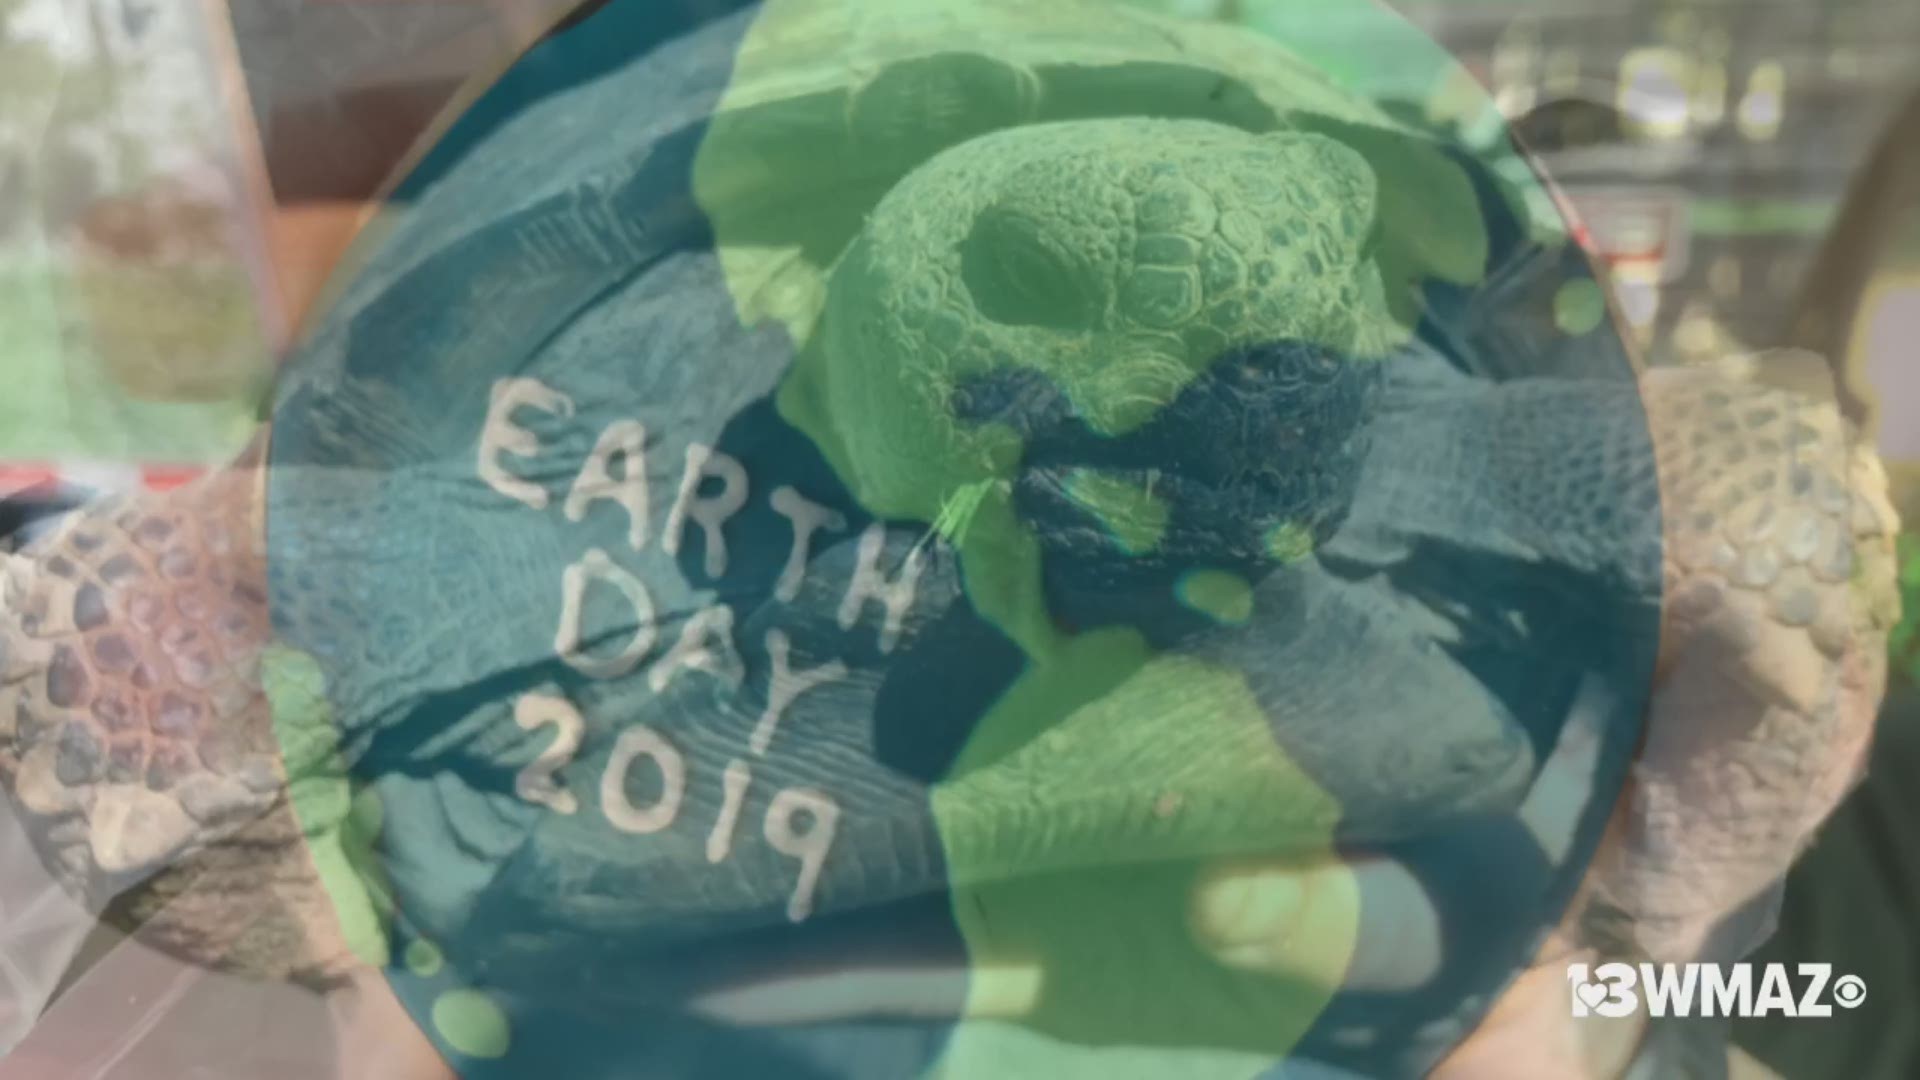 Check out everything going on at the Tattnall Square Park Earth Day market!